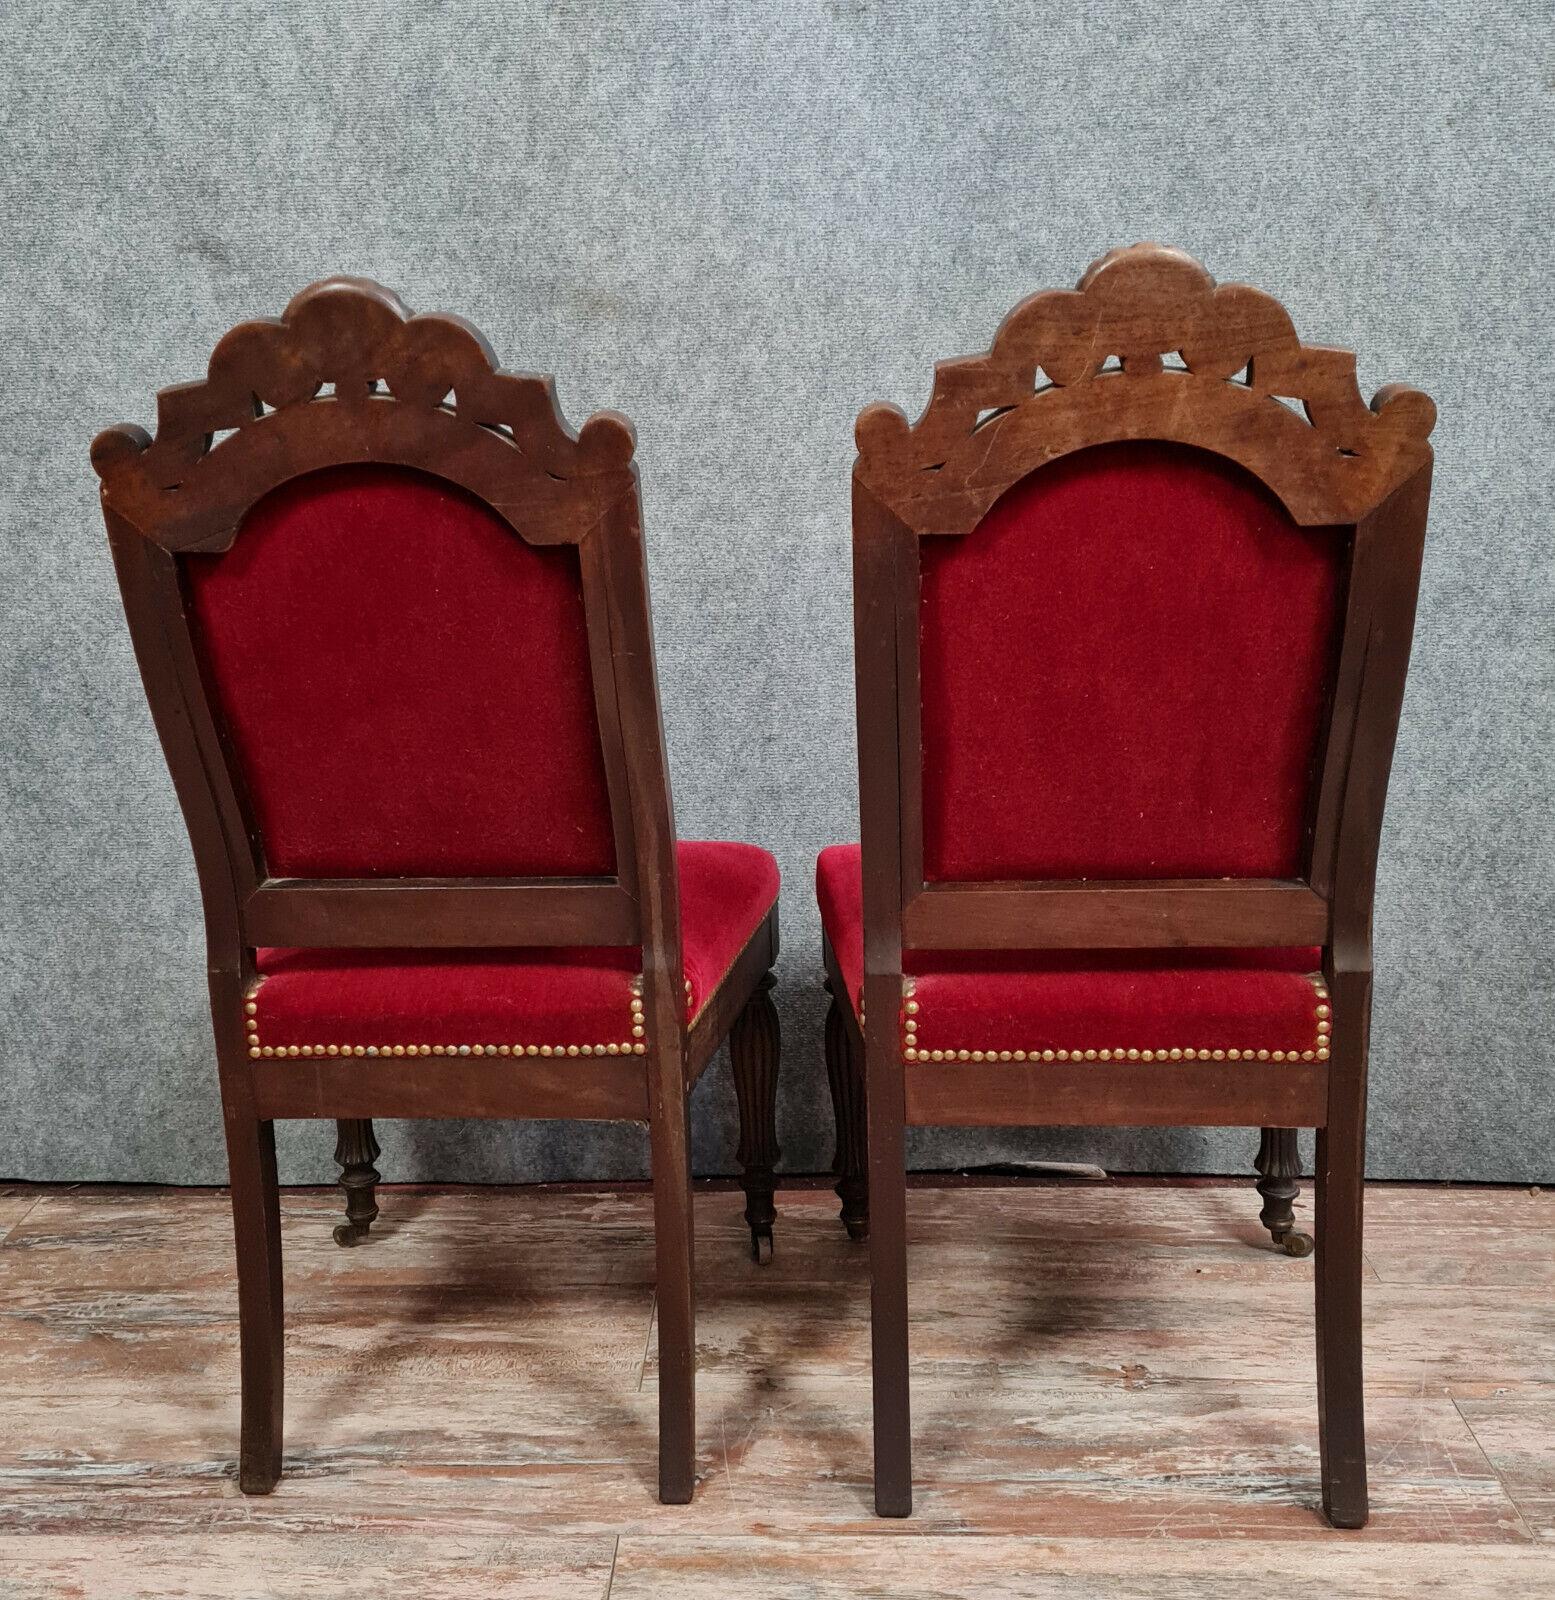 Exquisite Set of 4 Restauration Period Mahogany Chairs, circa 1820 -1X32 For Sale 7